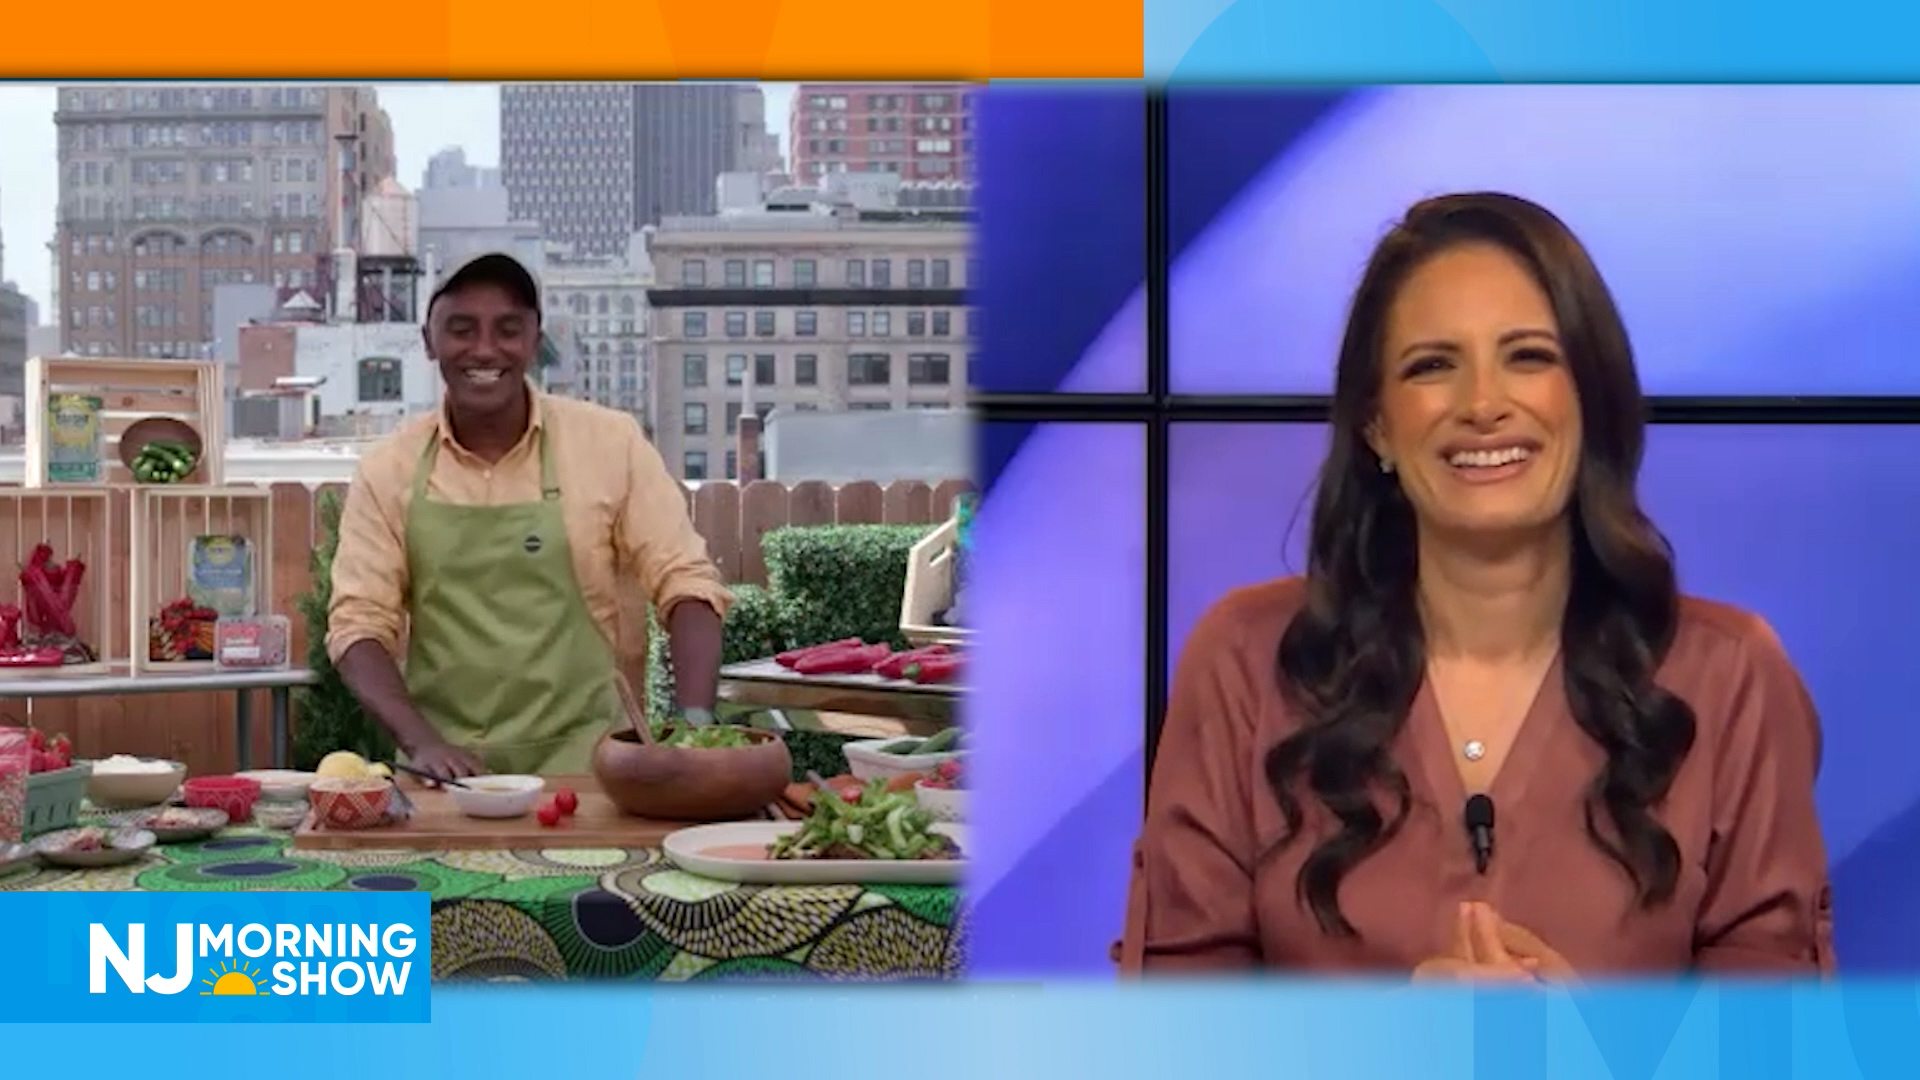 NJ Morning Show - Interview with Chef Marcus Samuelsson - On New Jersey